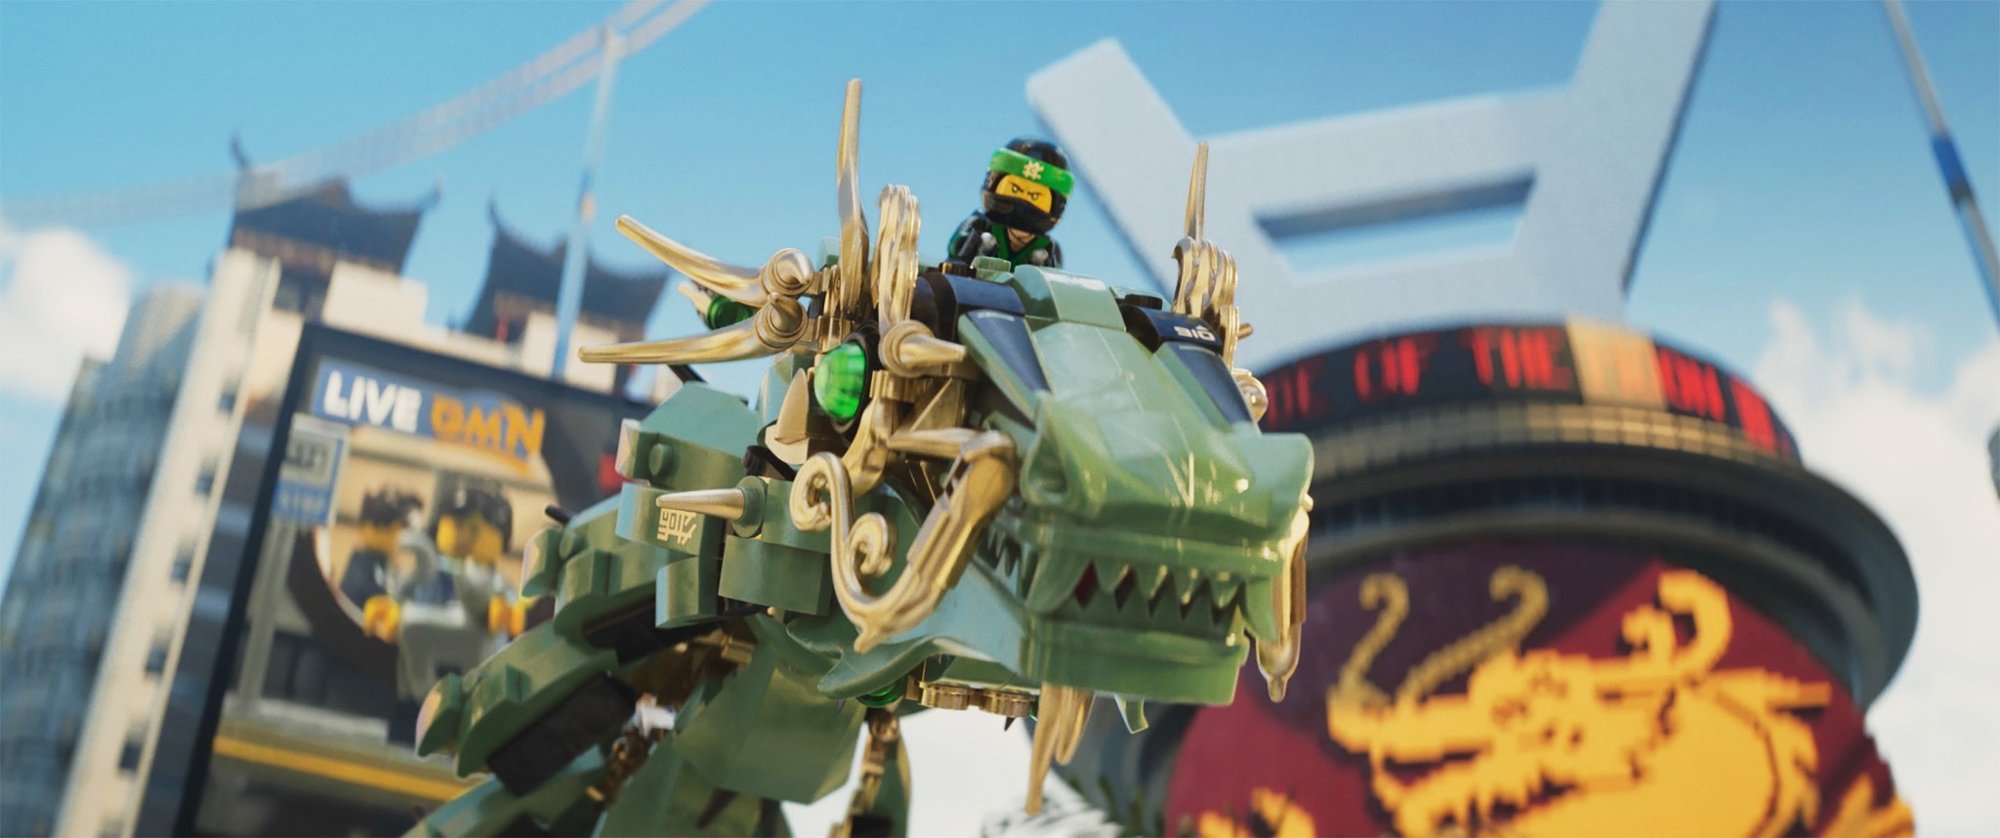 Lloyd from Warner Bros. Pictures' The Lego Ninjago Movie (2017)